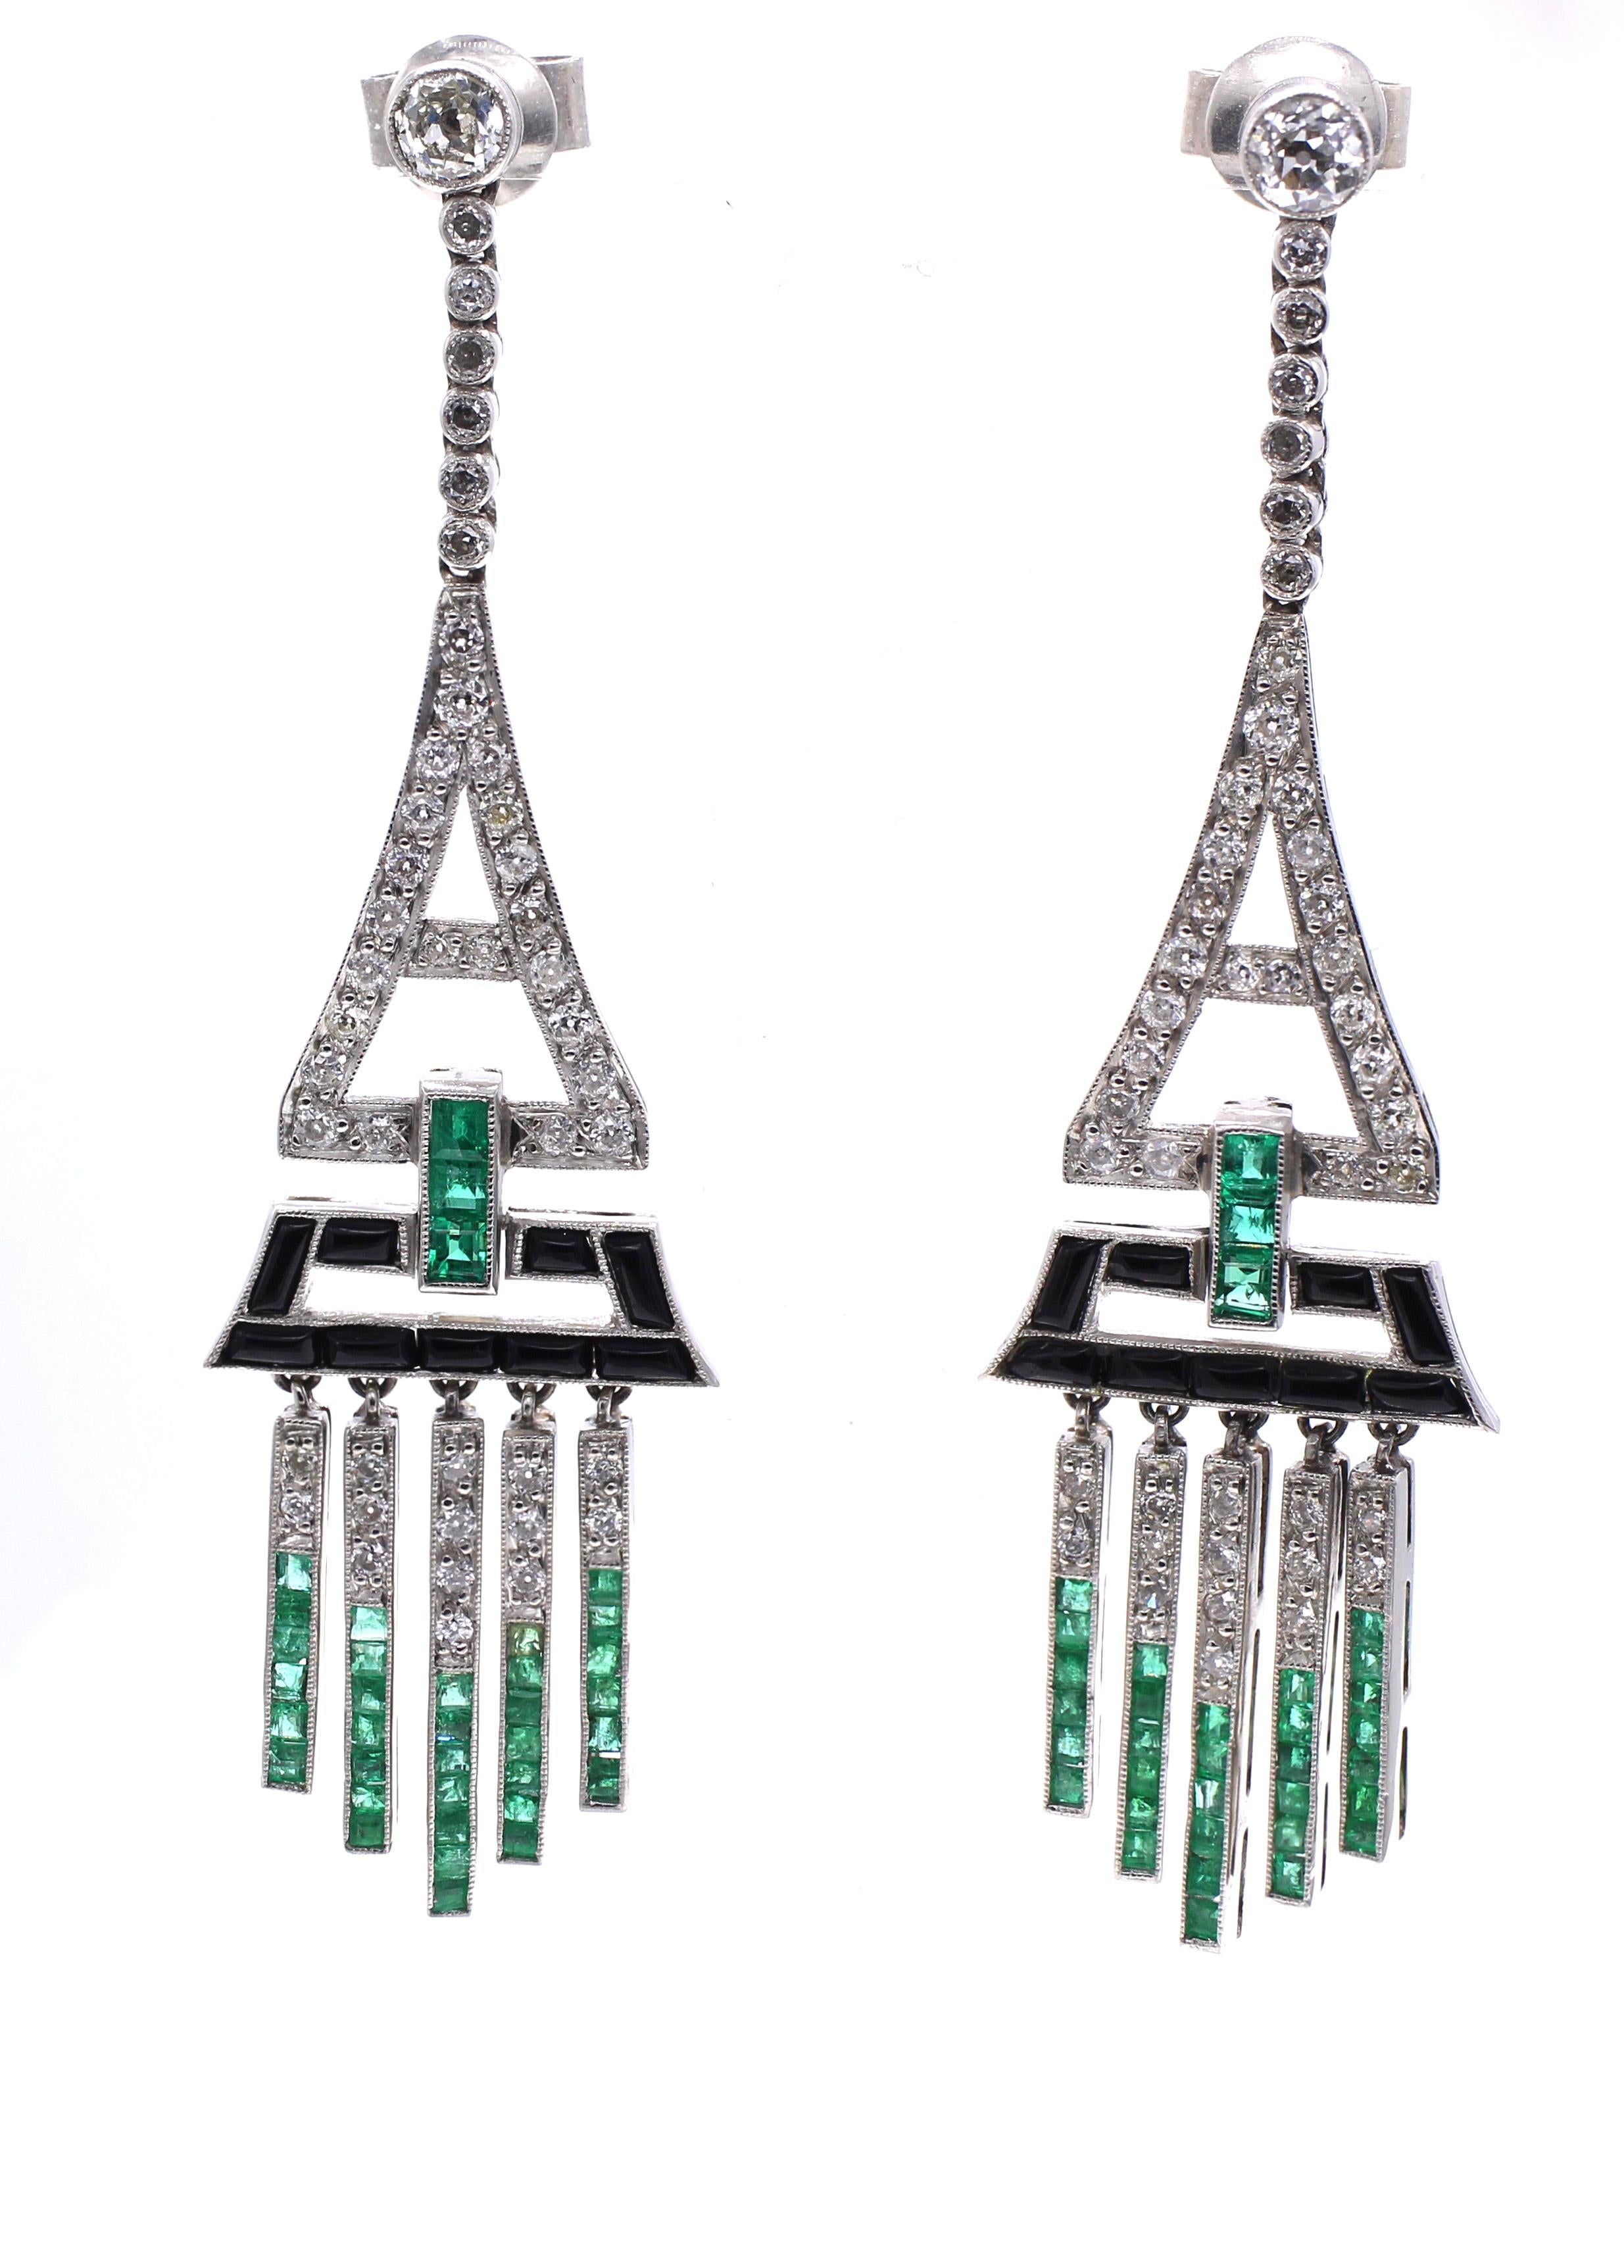 Beautifully designed and masterfully handcrafted these amazing Art Deco ear pendants from ca 1925 are just stunning on the ear. Set in platinum with calibre cut emeralds, buff top onyx and white bright old cut diamonds they bring a unique and